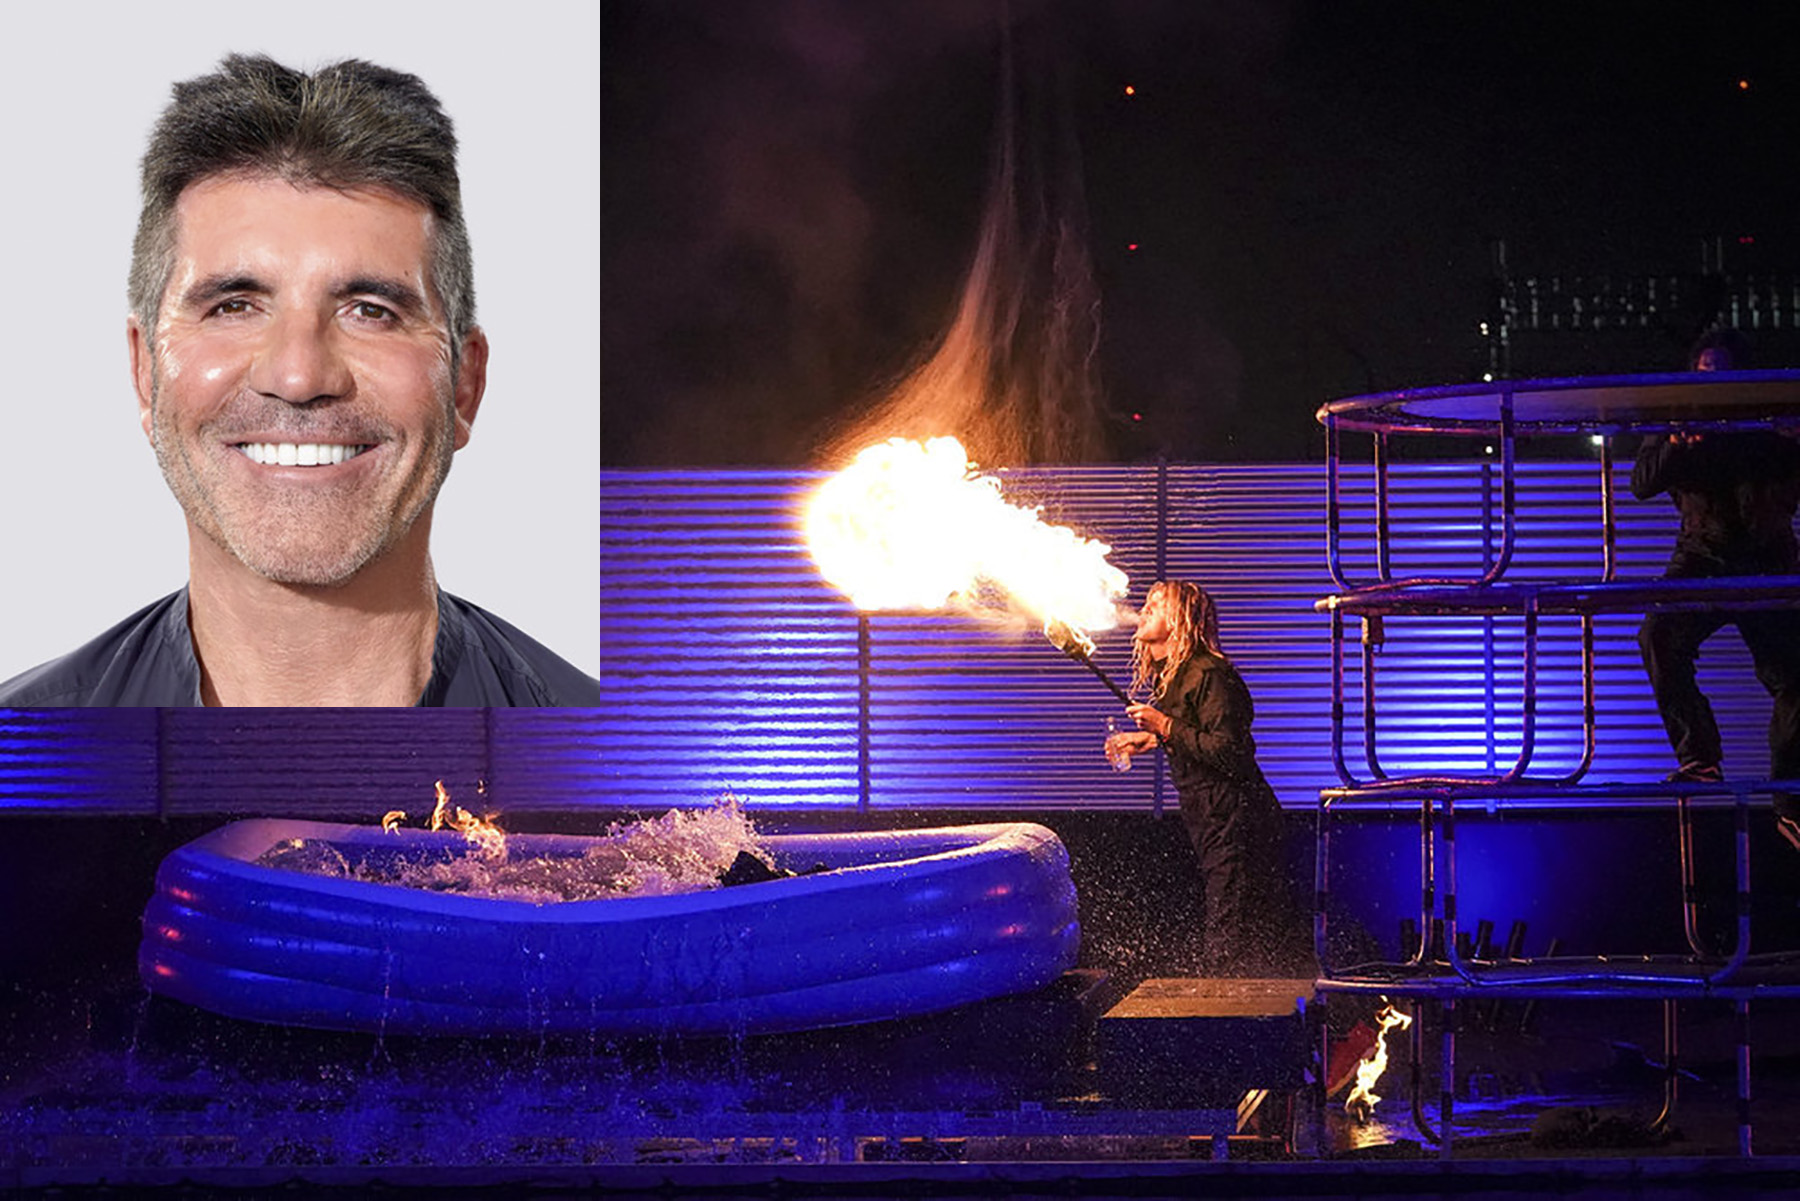 America's Got Talent - Big smiles from Simon Cowell. Big talent from  tonight's contestants.